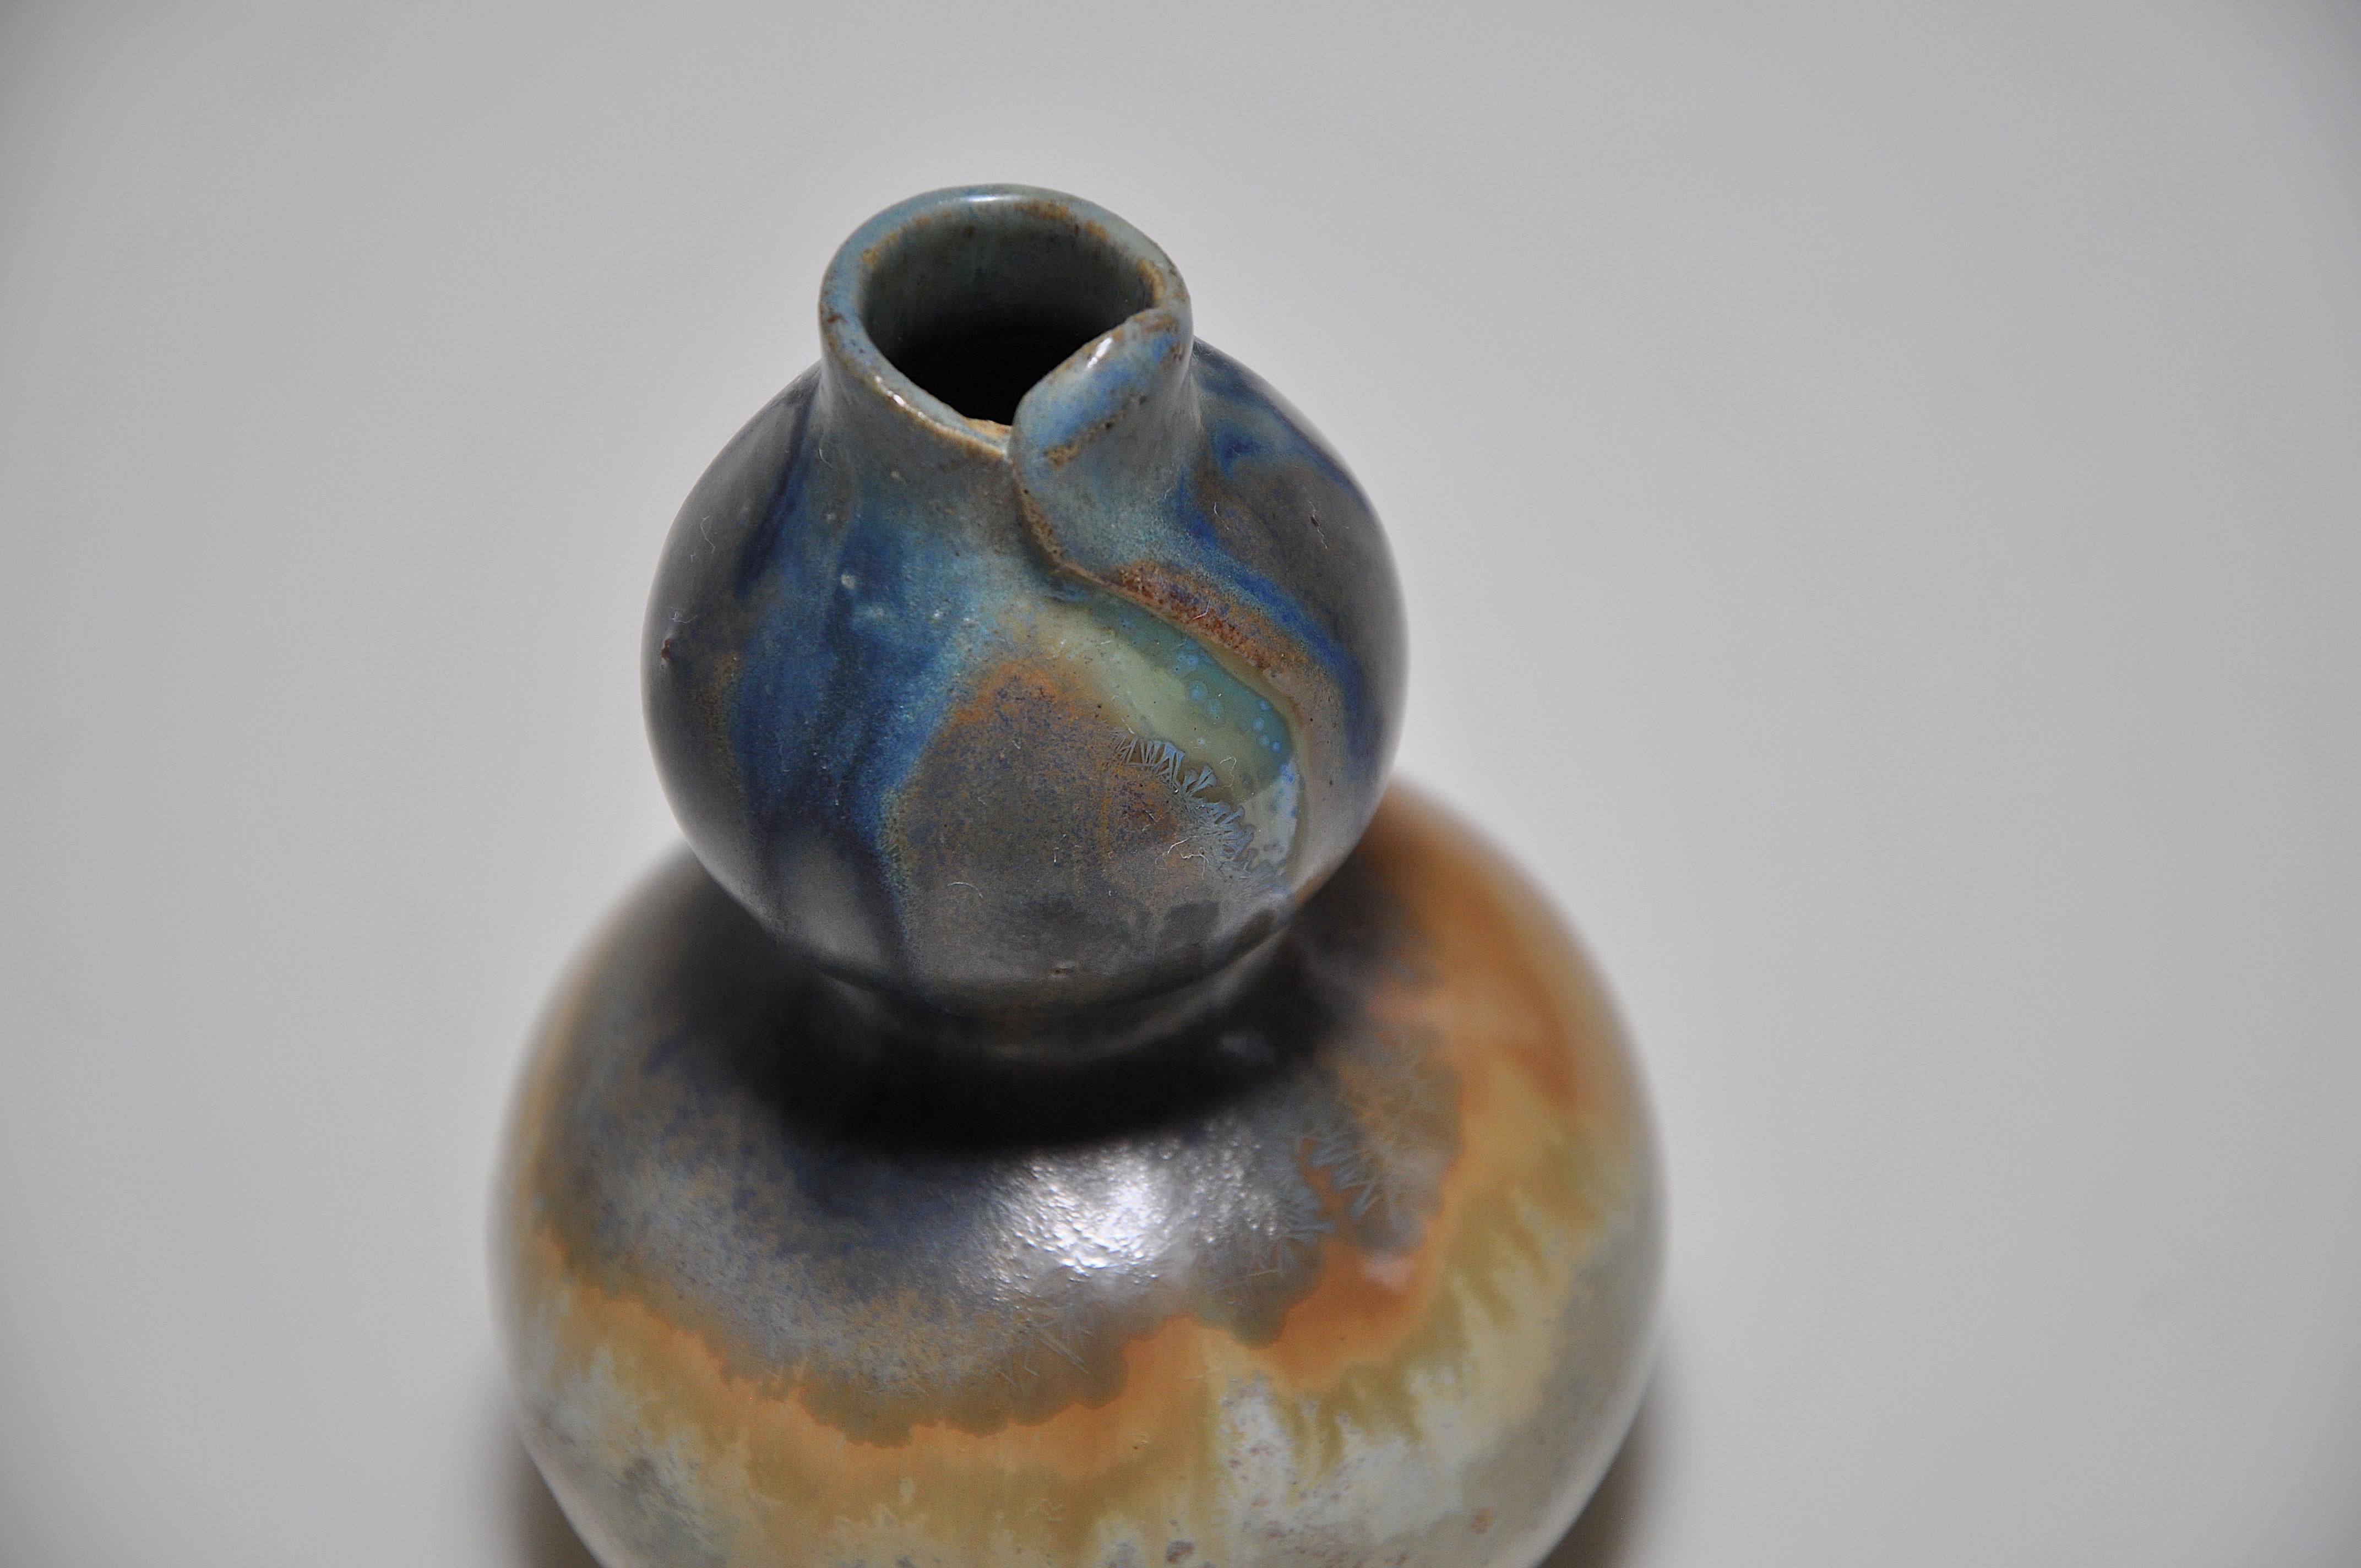 A small but rare stoneware vase of double-gourd Japonist form and organic character, freely treated at the top rim where it is a rare example of a cut and overlapped fold, reminiscent of a phallic shape or even the delicate petals of a flower. It